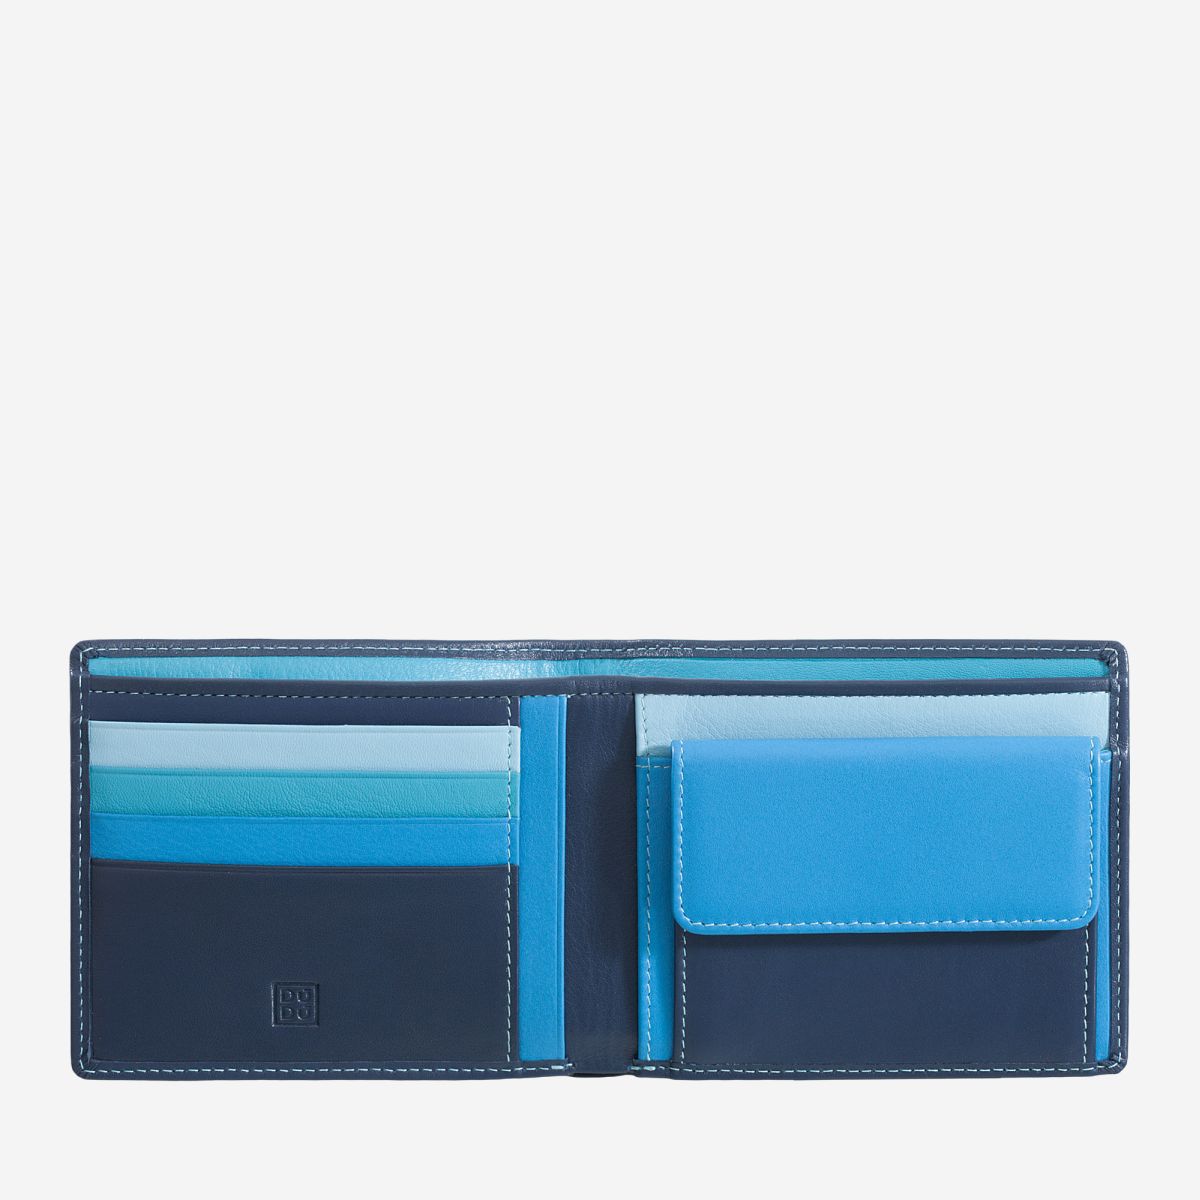 DuDu Slim Leather Multi Color Callet With Coin Purse - Blue